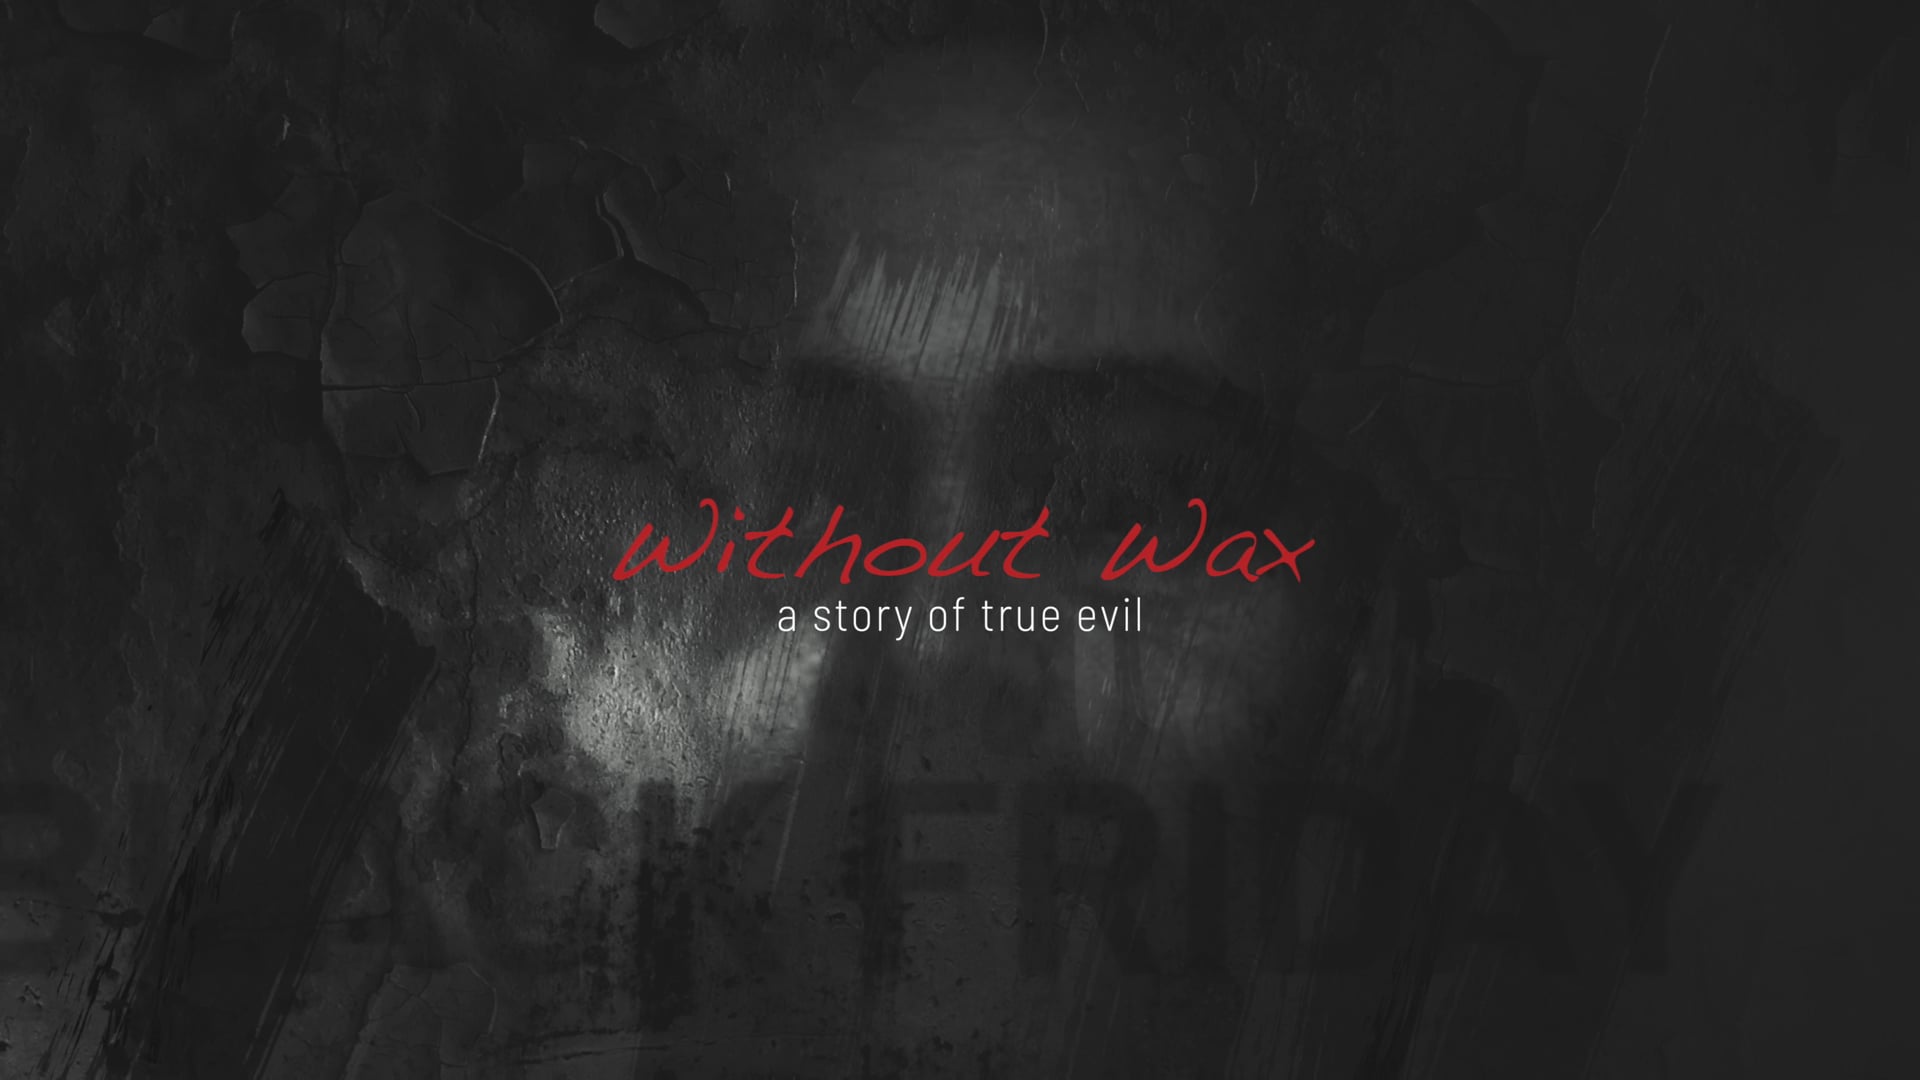 Without Wax: A Story of True Evil - Official Trailer #1